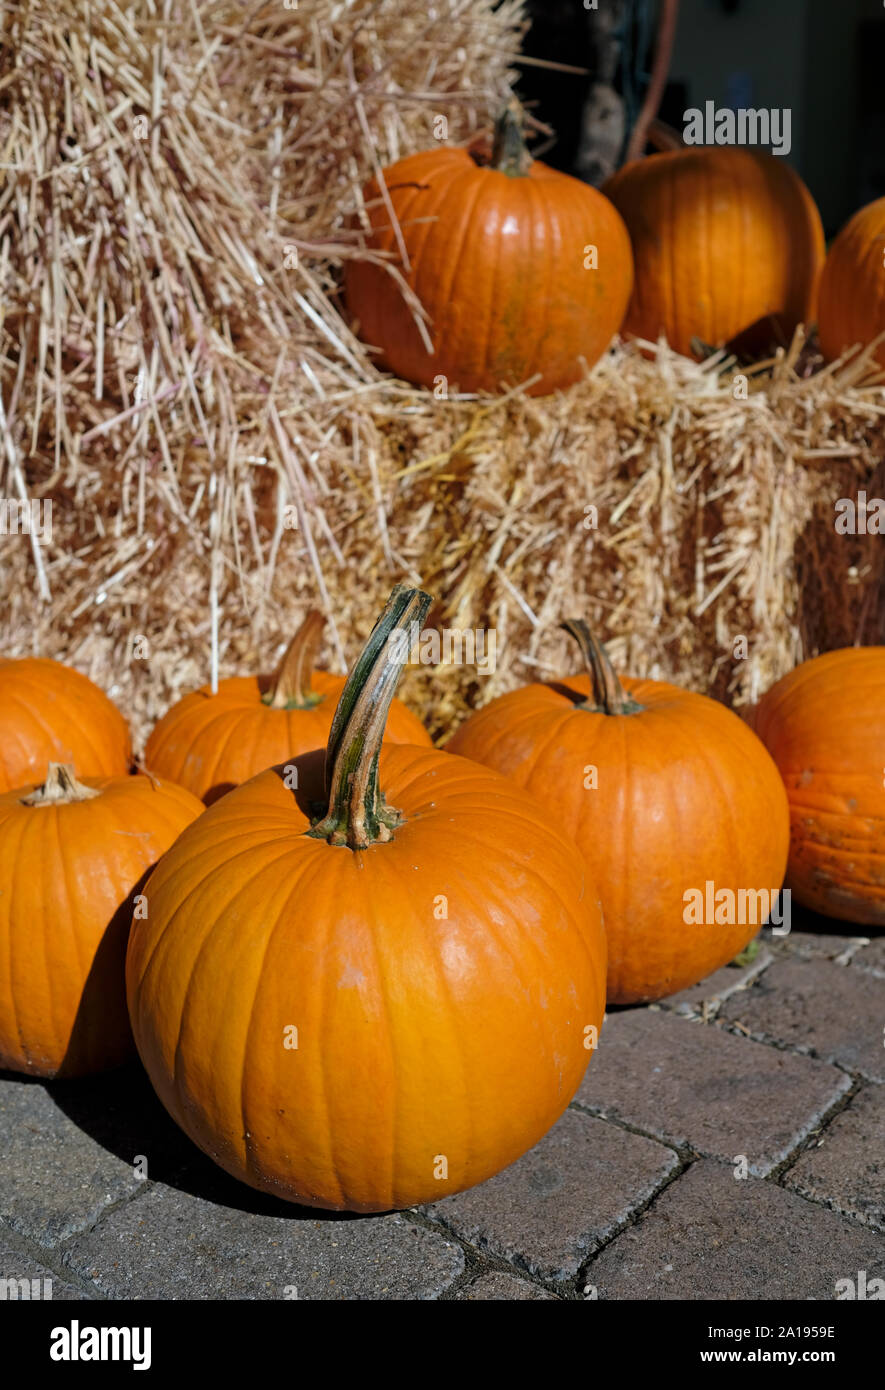 Thanksgiving and Halloween: Multiple pumpkins on and around stacks of hay Stock Photo